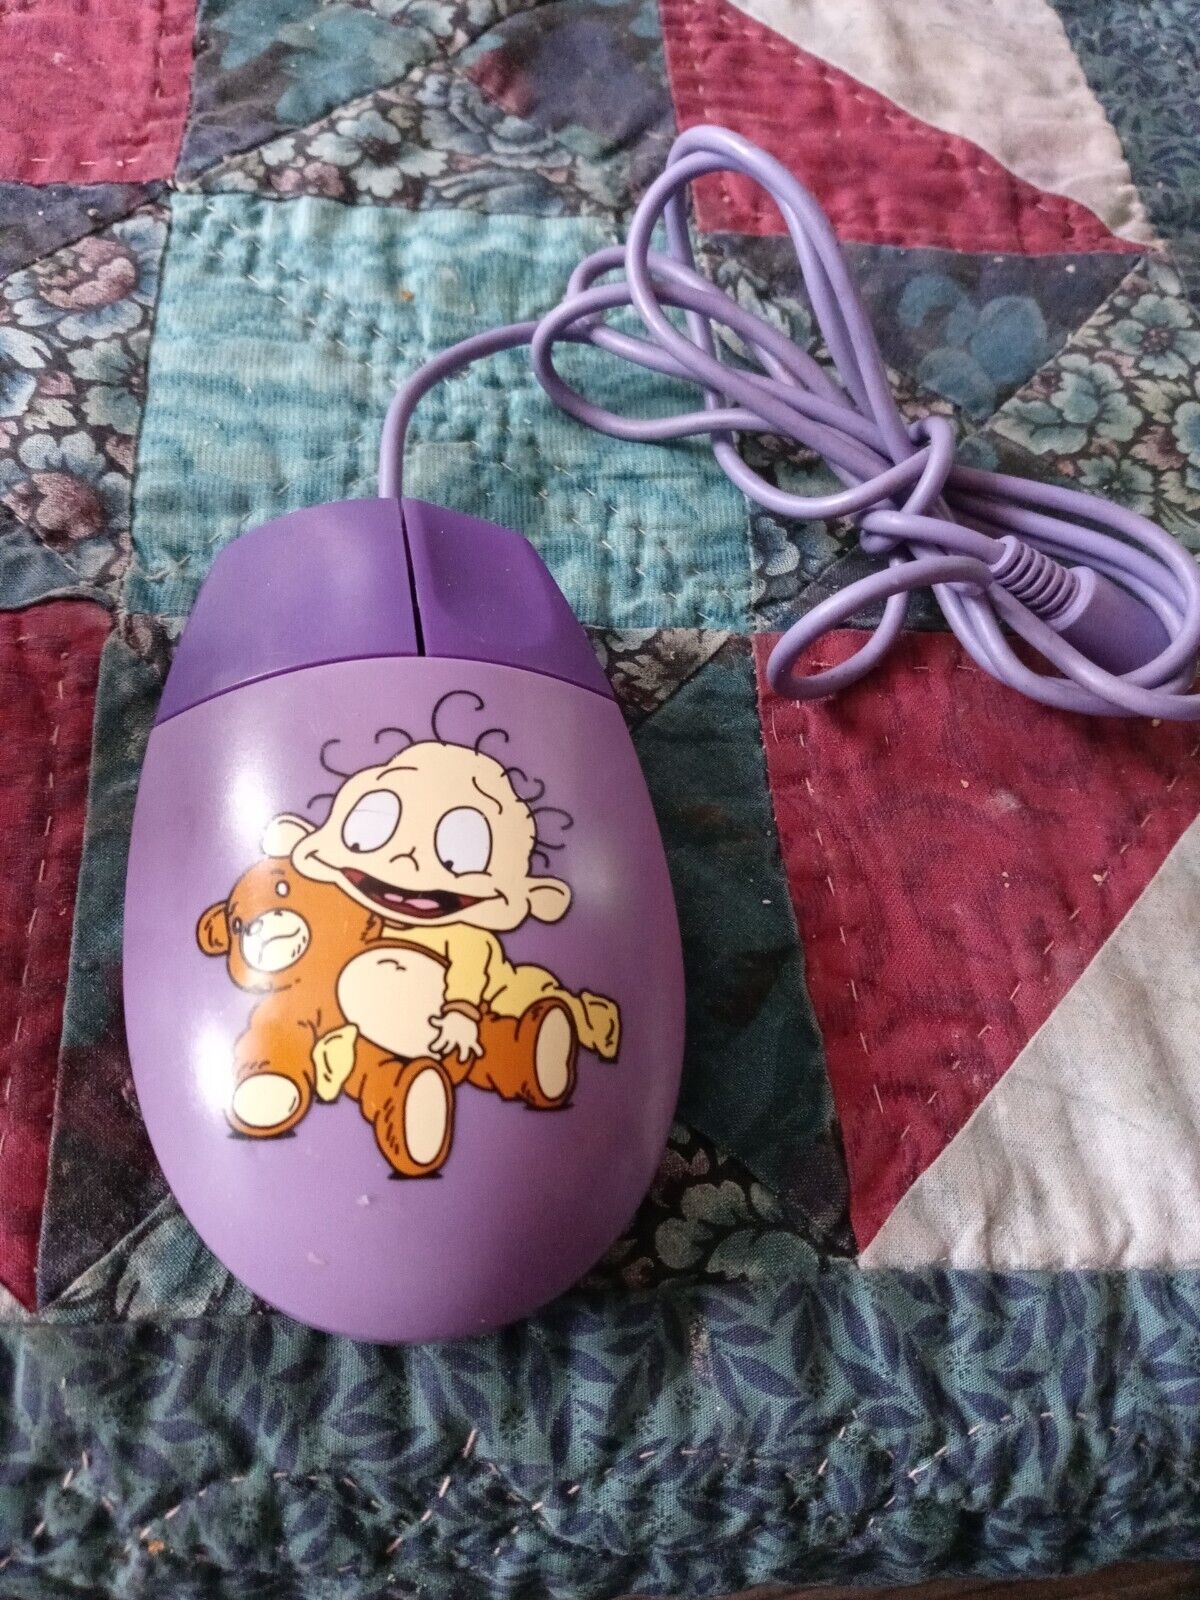 Nickelodeon Rugrats Dil Pickles  2001 Wired PS2 Ball Mouse Purple VINTAGE MINT